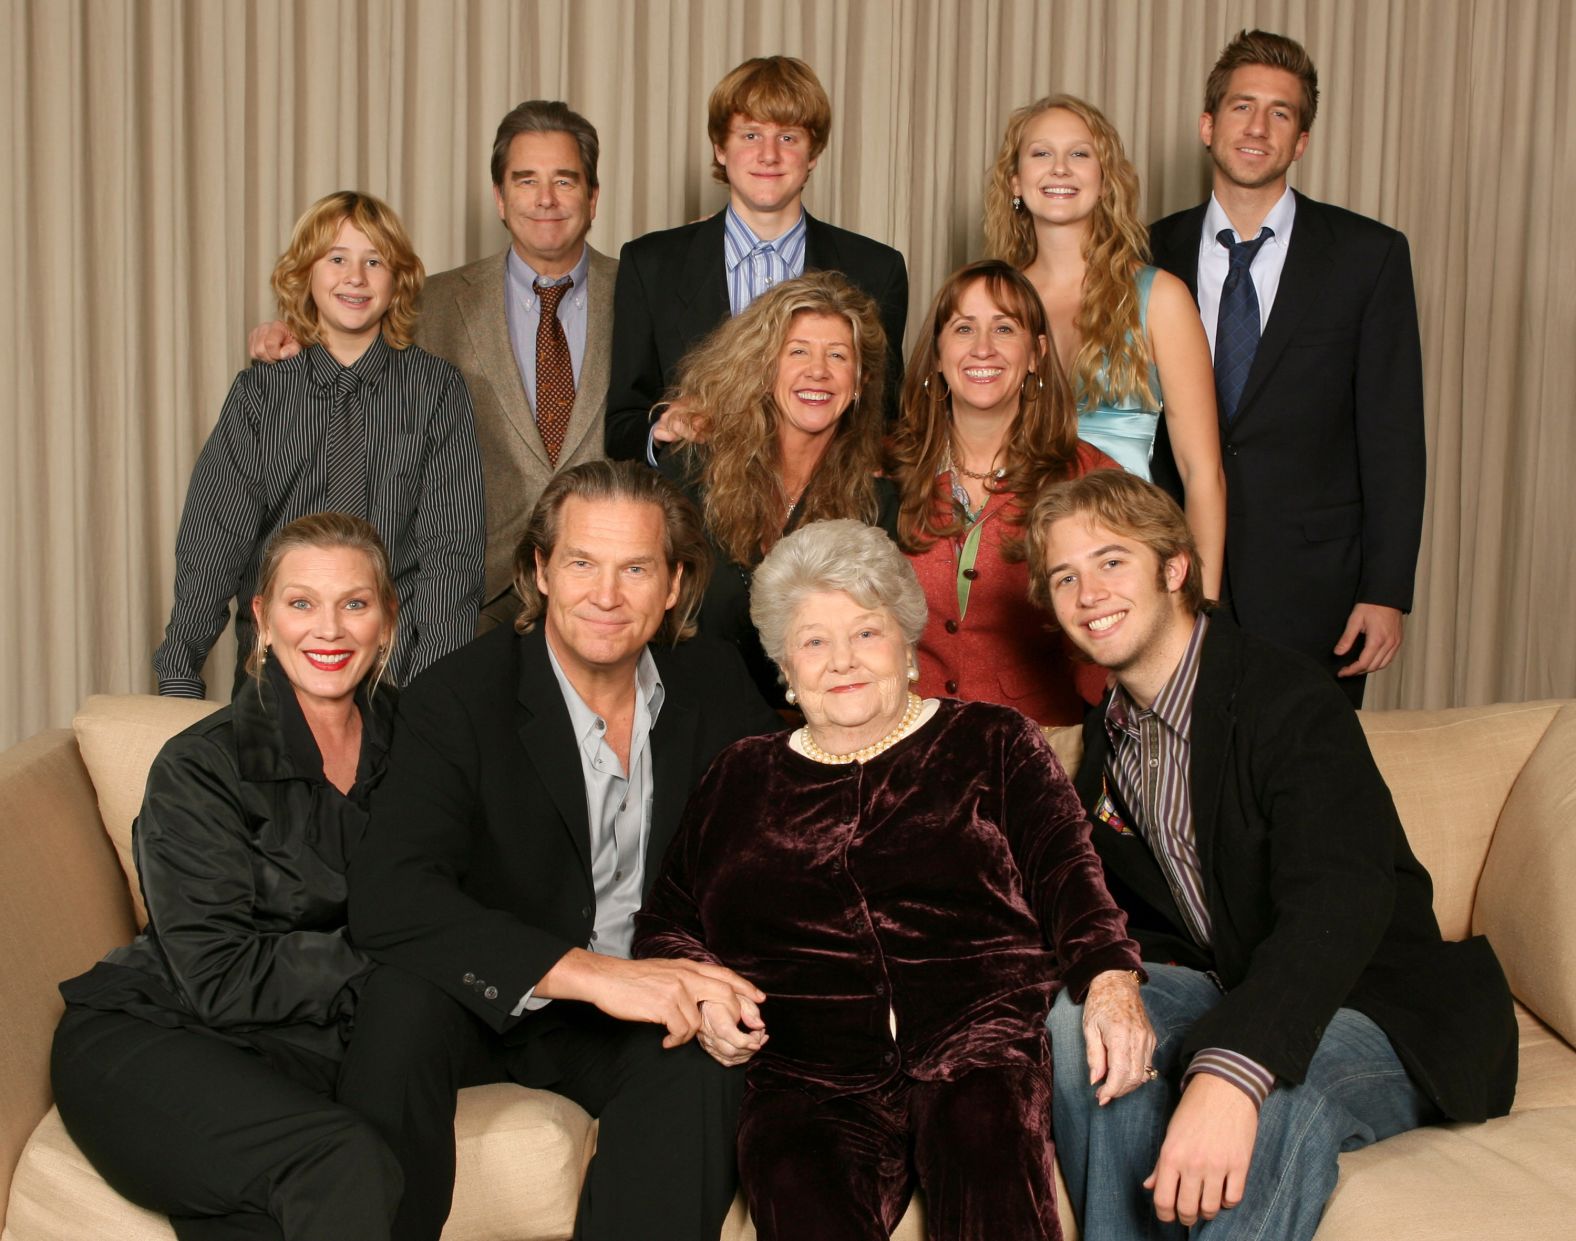 Bridges, seated second from left, poses with various members of his family in 2006. Seated with Bridges, from left, are his wife, Susan; his mother, Dorothy; and his nephew Dylan. Bridges' brother, Beau, is second from left behind him, and his sister, Cindy, is fourth from left.